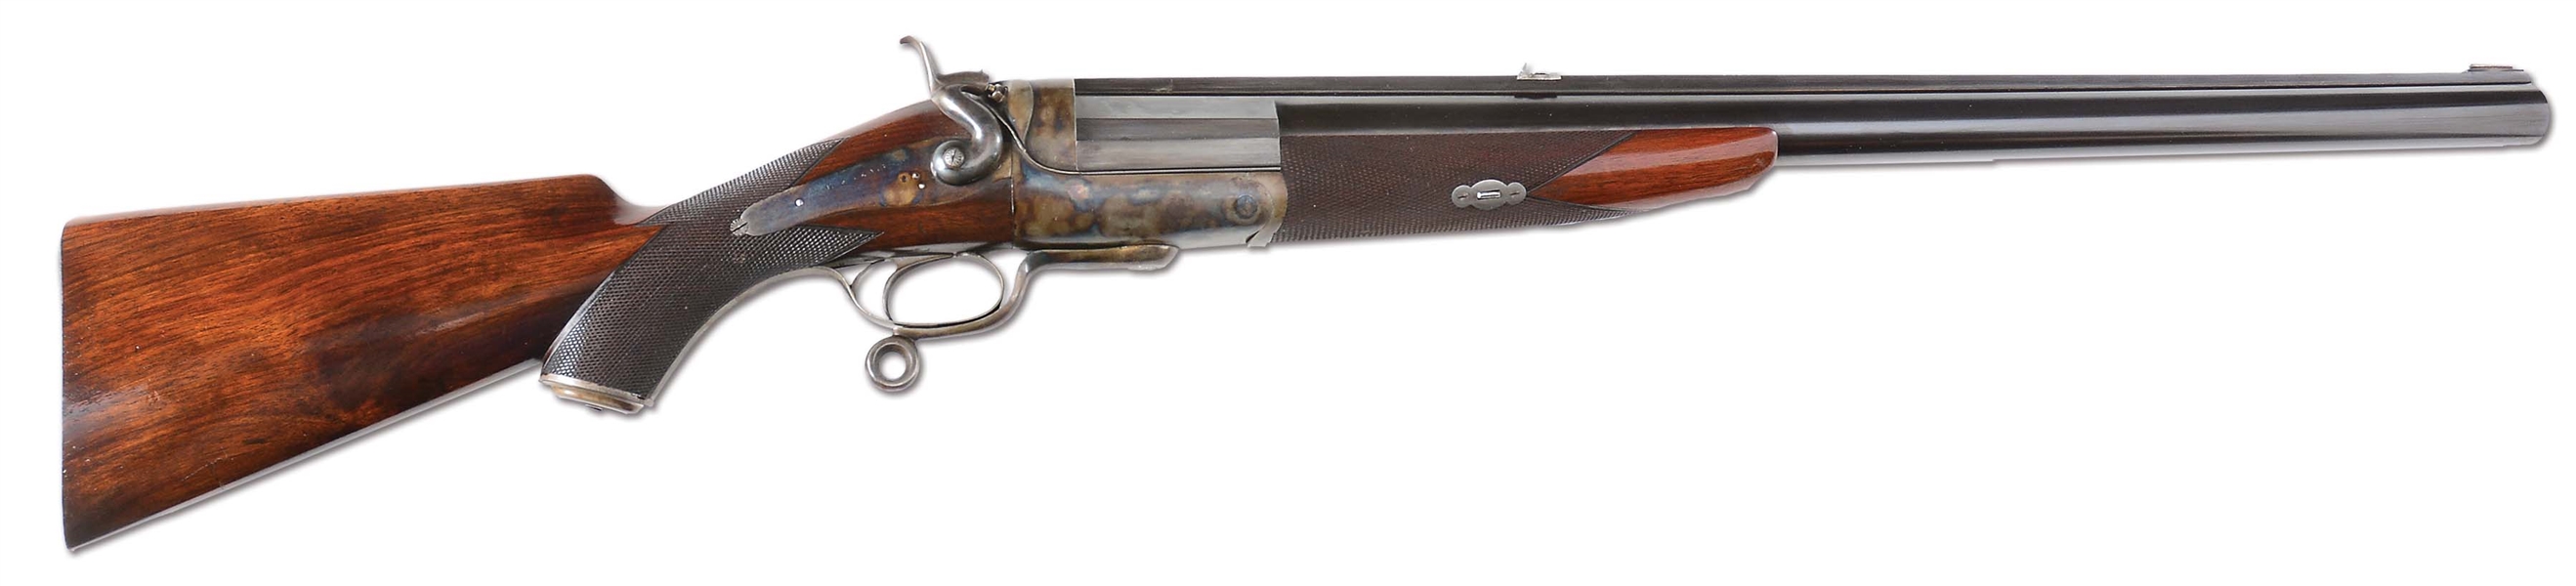 (A) TRULY WONDERFUL 8 BORE SINGLE SHOT STOPPING RIFLE BY G. E. LEWIS IN EXTRAORDINARY ORIGINAL CONDITION.